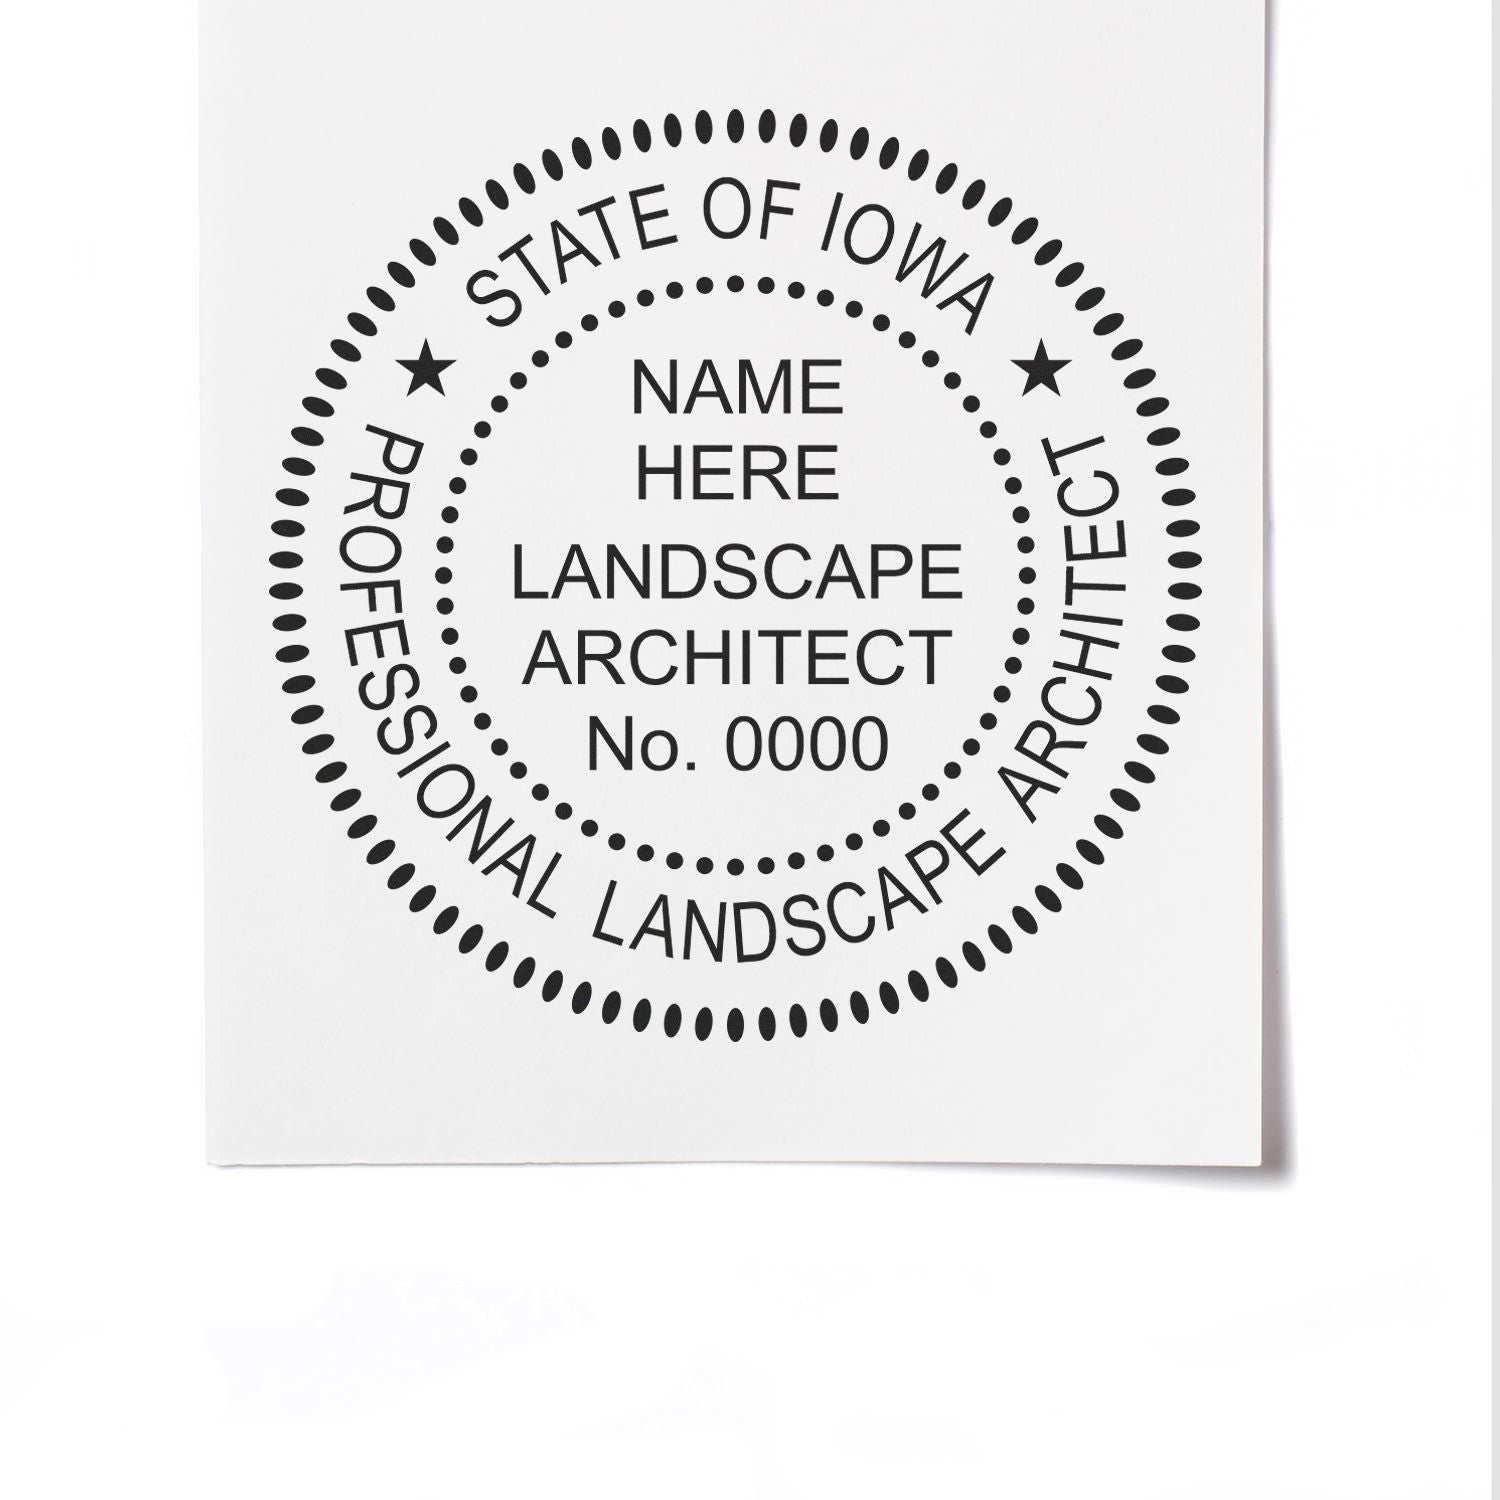 A lifestyle photo showing a stamped image of the Digital Iowa Landscape Architect Stamp on a piece of paper